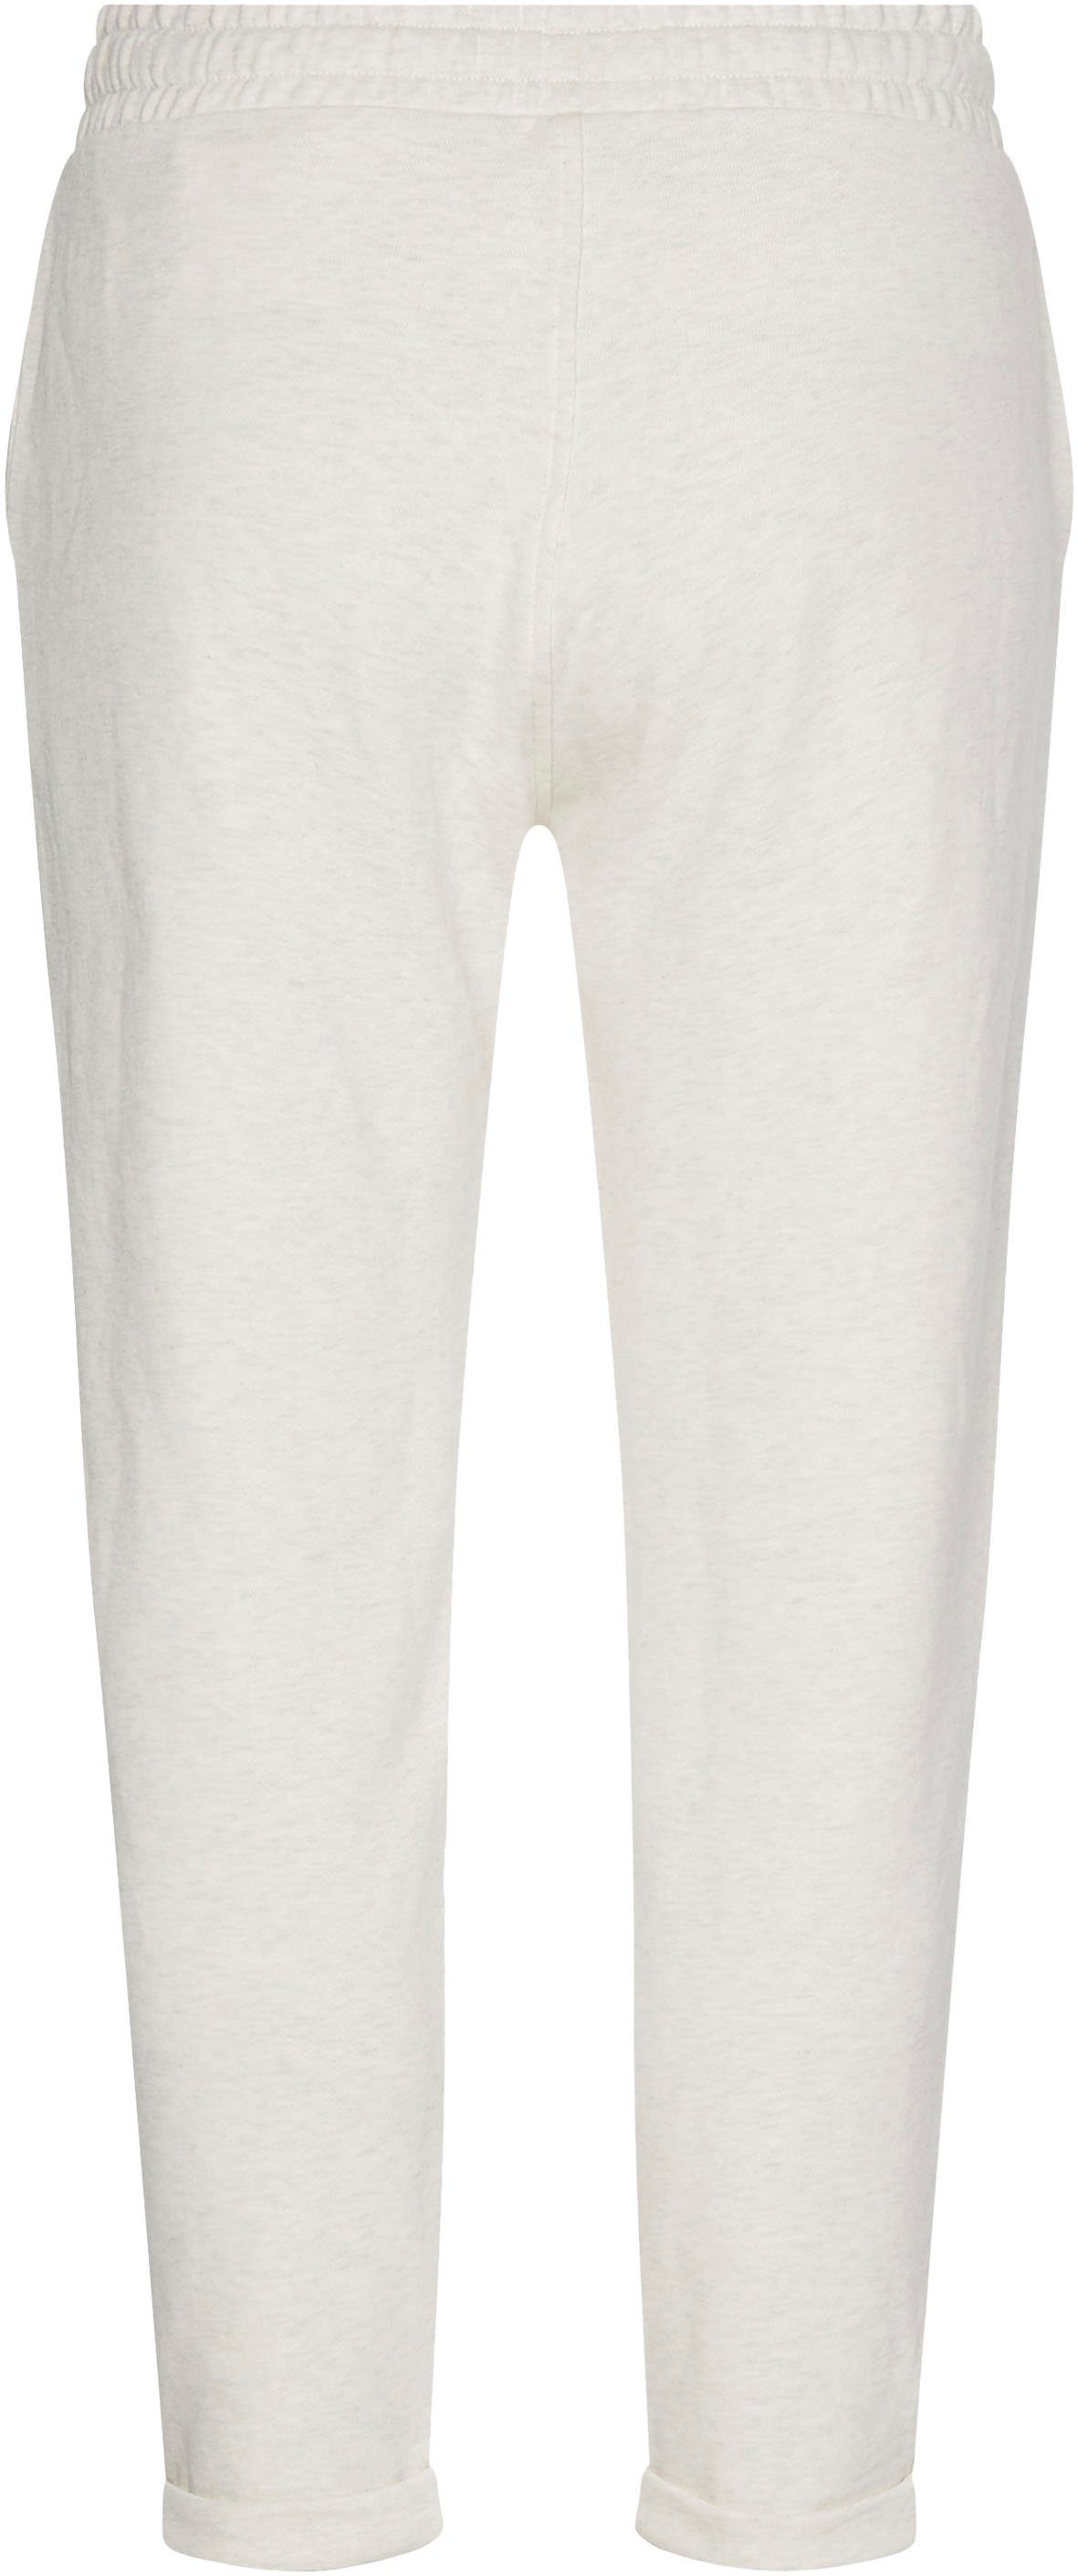 Hilfiger Hilfiger Markenlabel NYC ROUNDALL TAPERED Sweatpants Tommy White-Heather SWEATPANTS mit Tommy